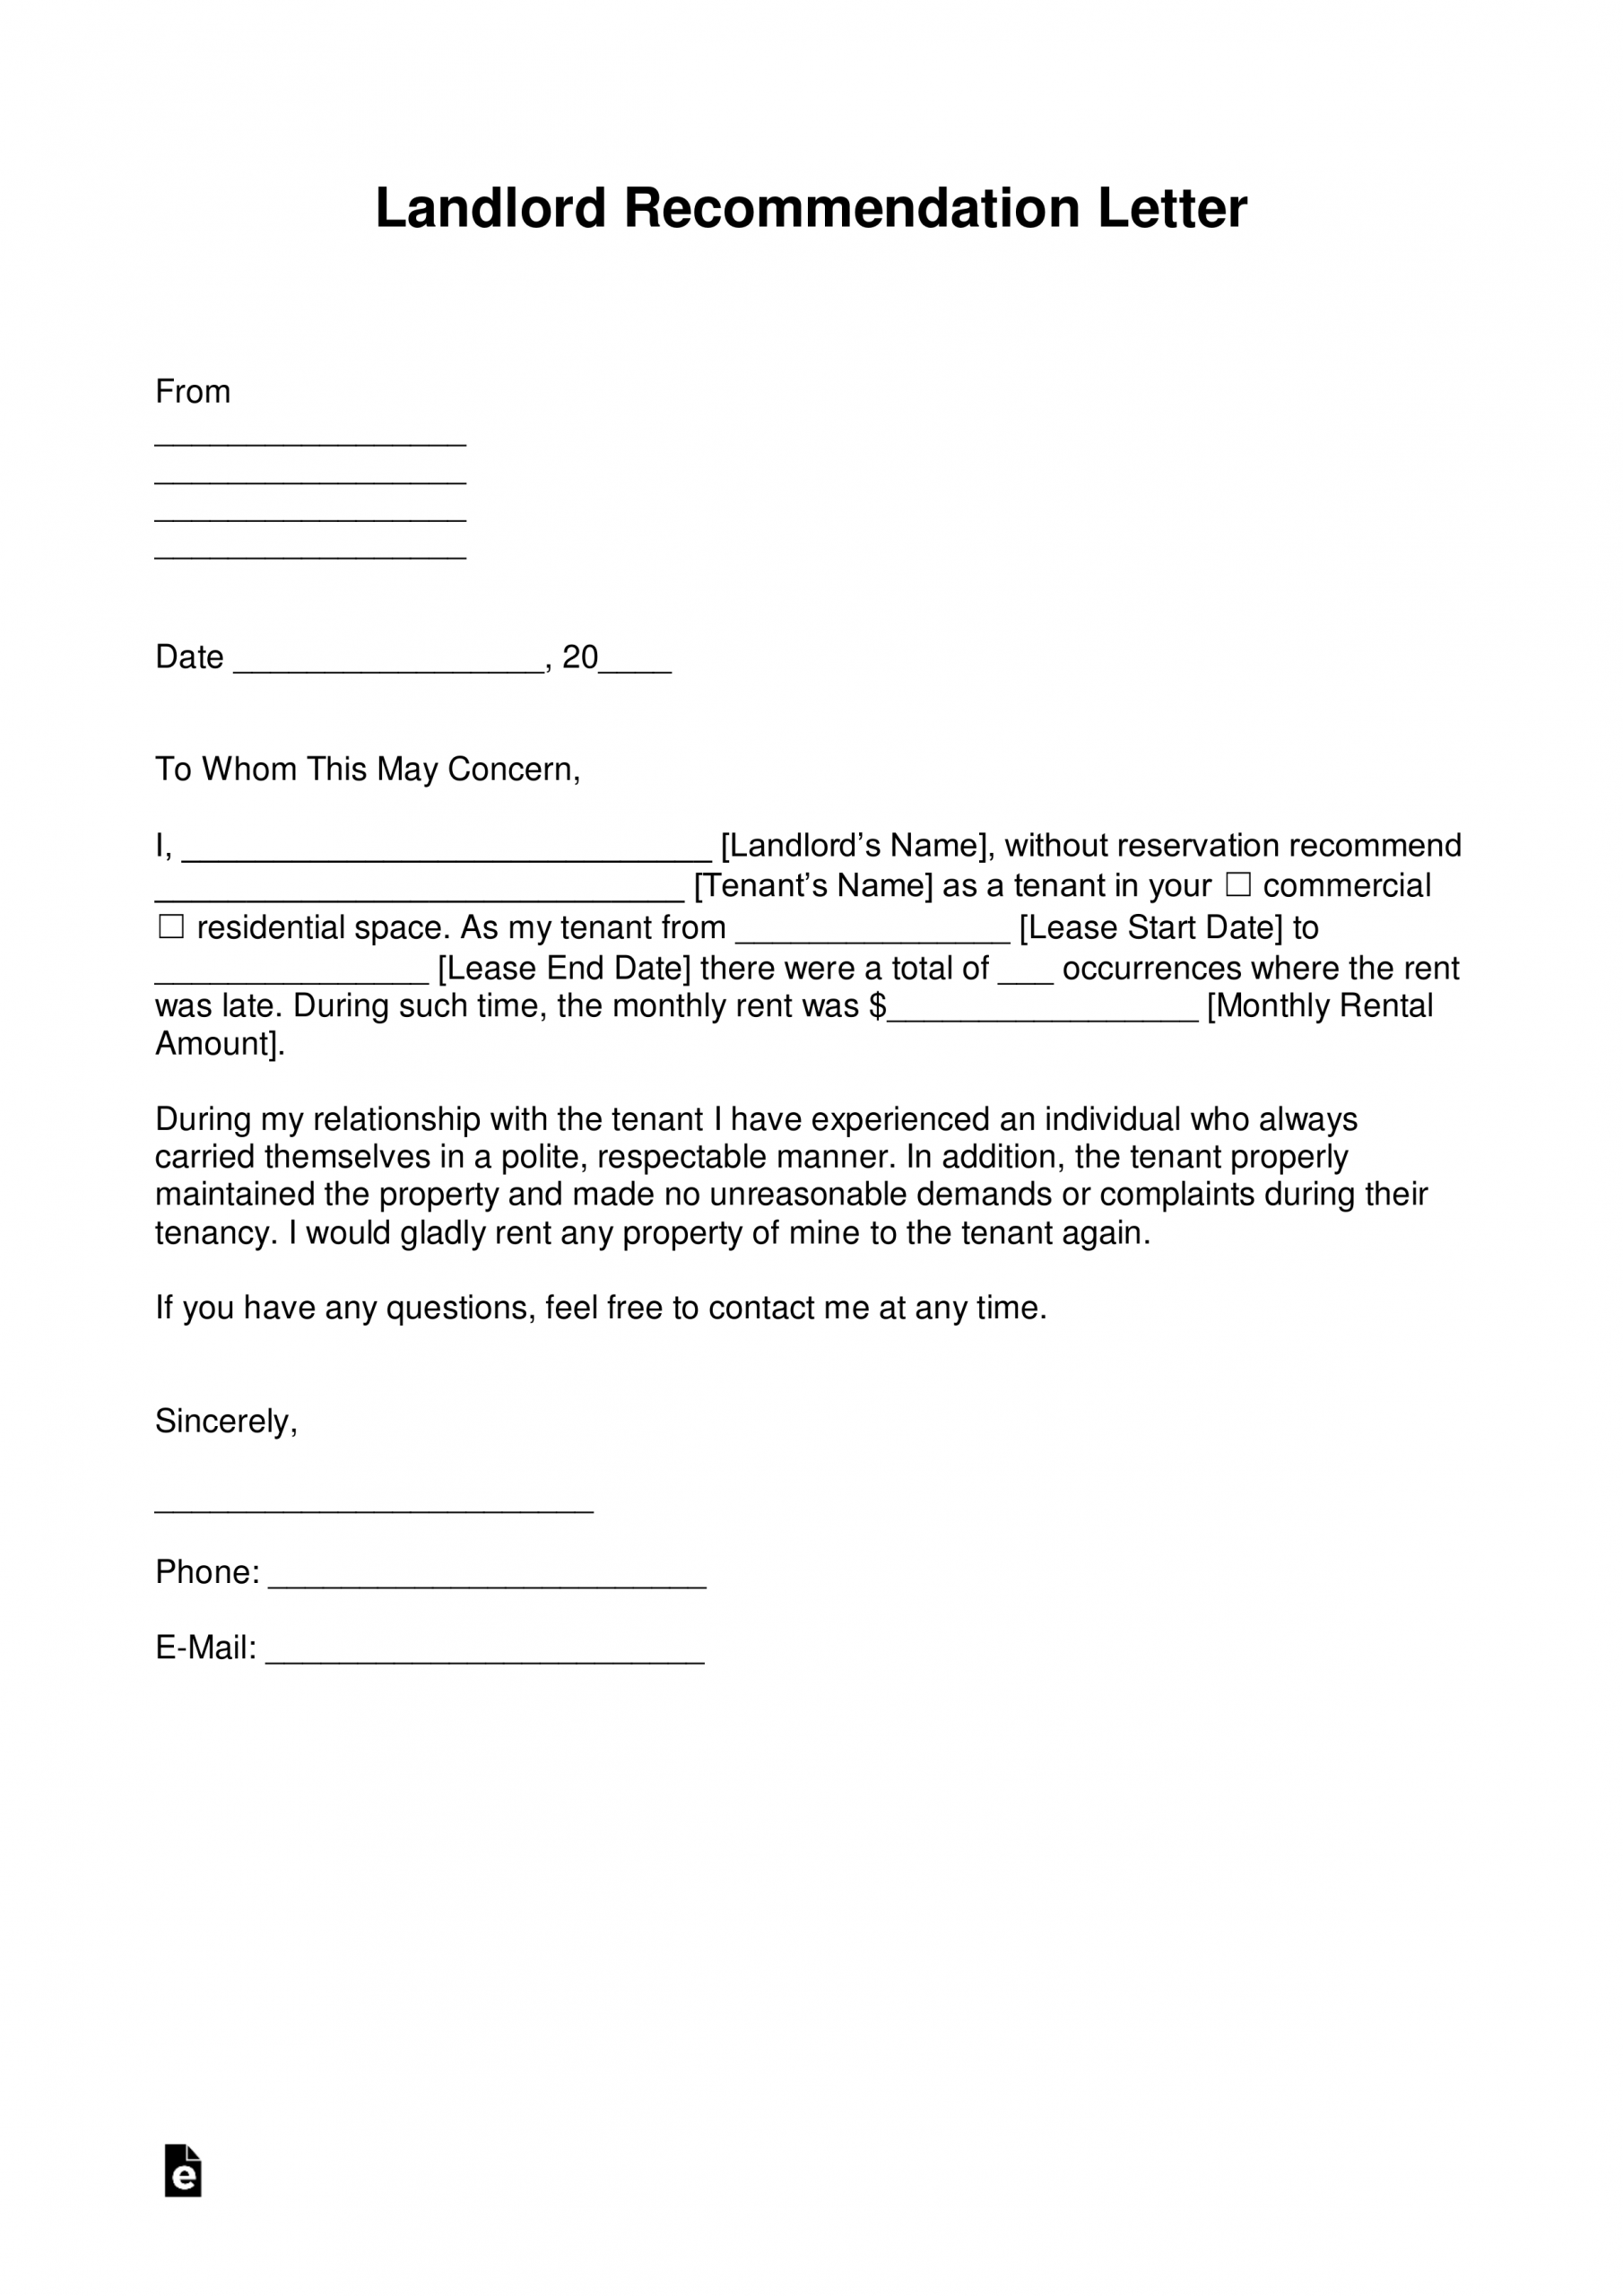 Free Landlord Recommendation Letter For A Tenant With in proportions 2473 X 3497